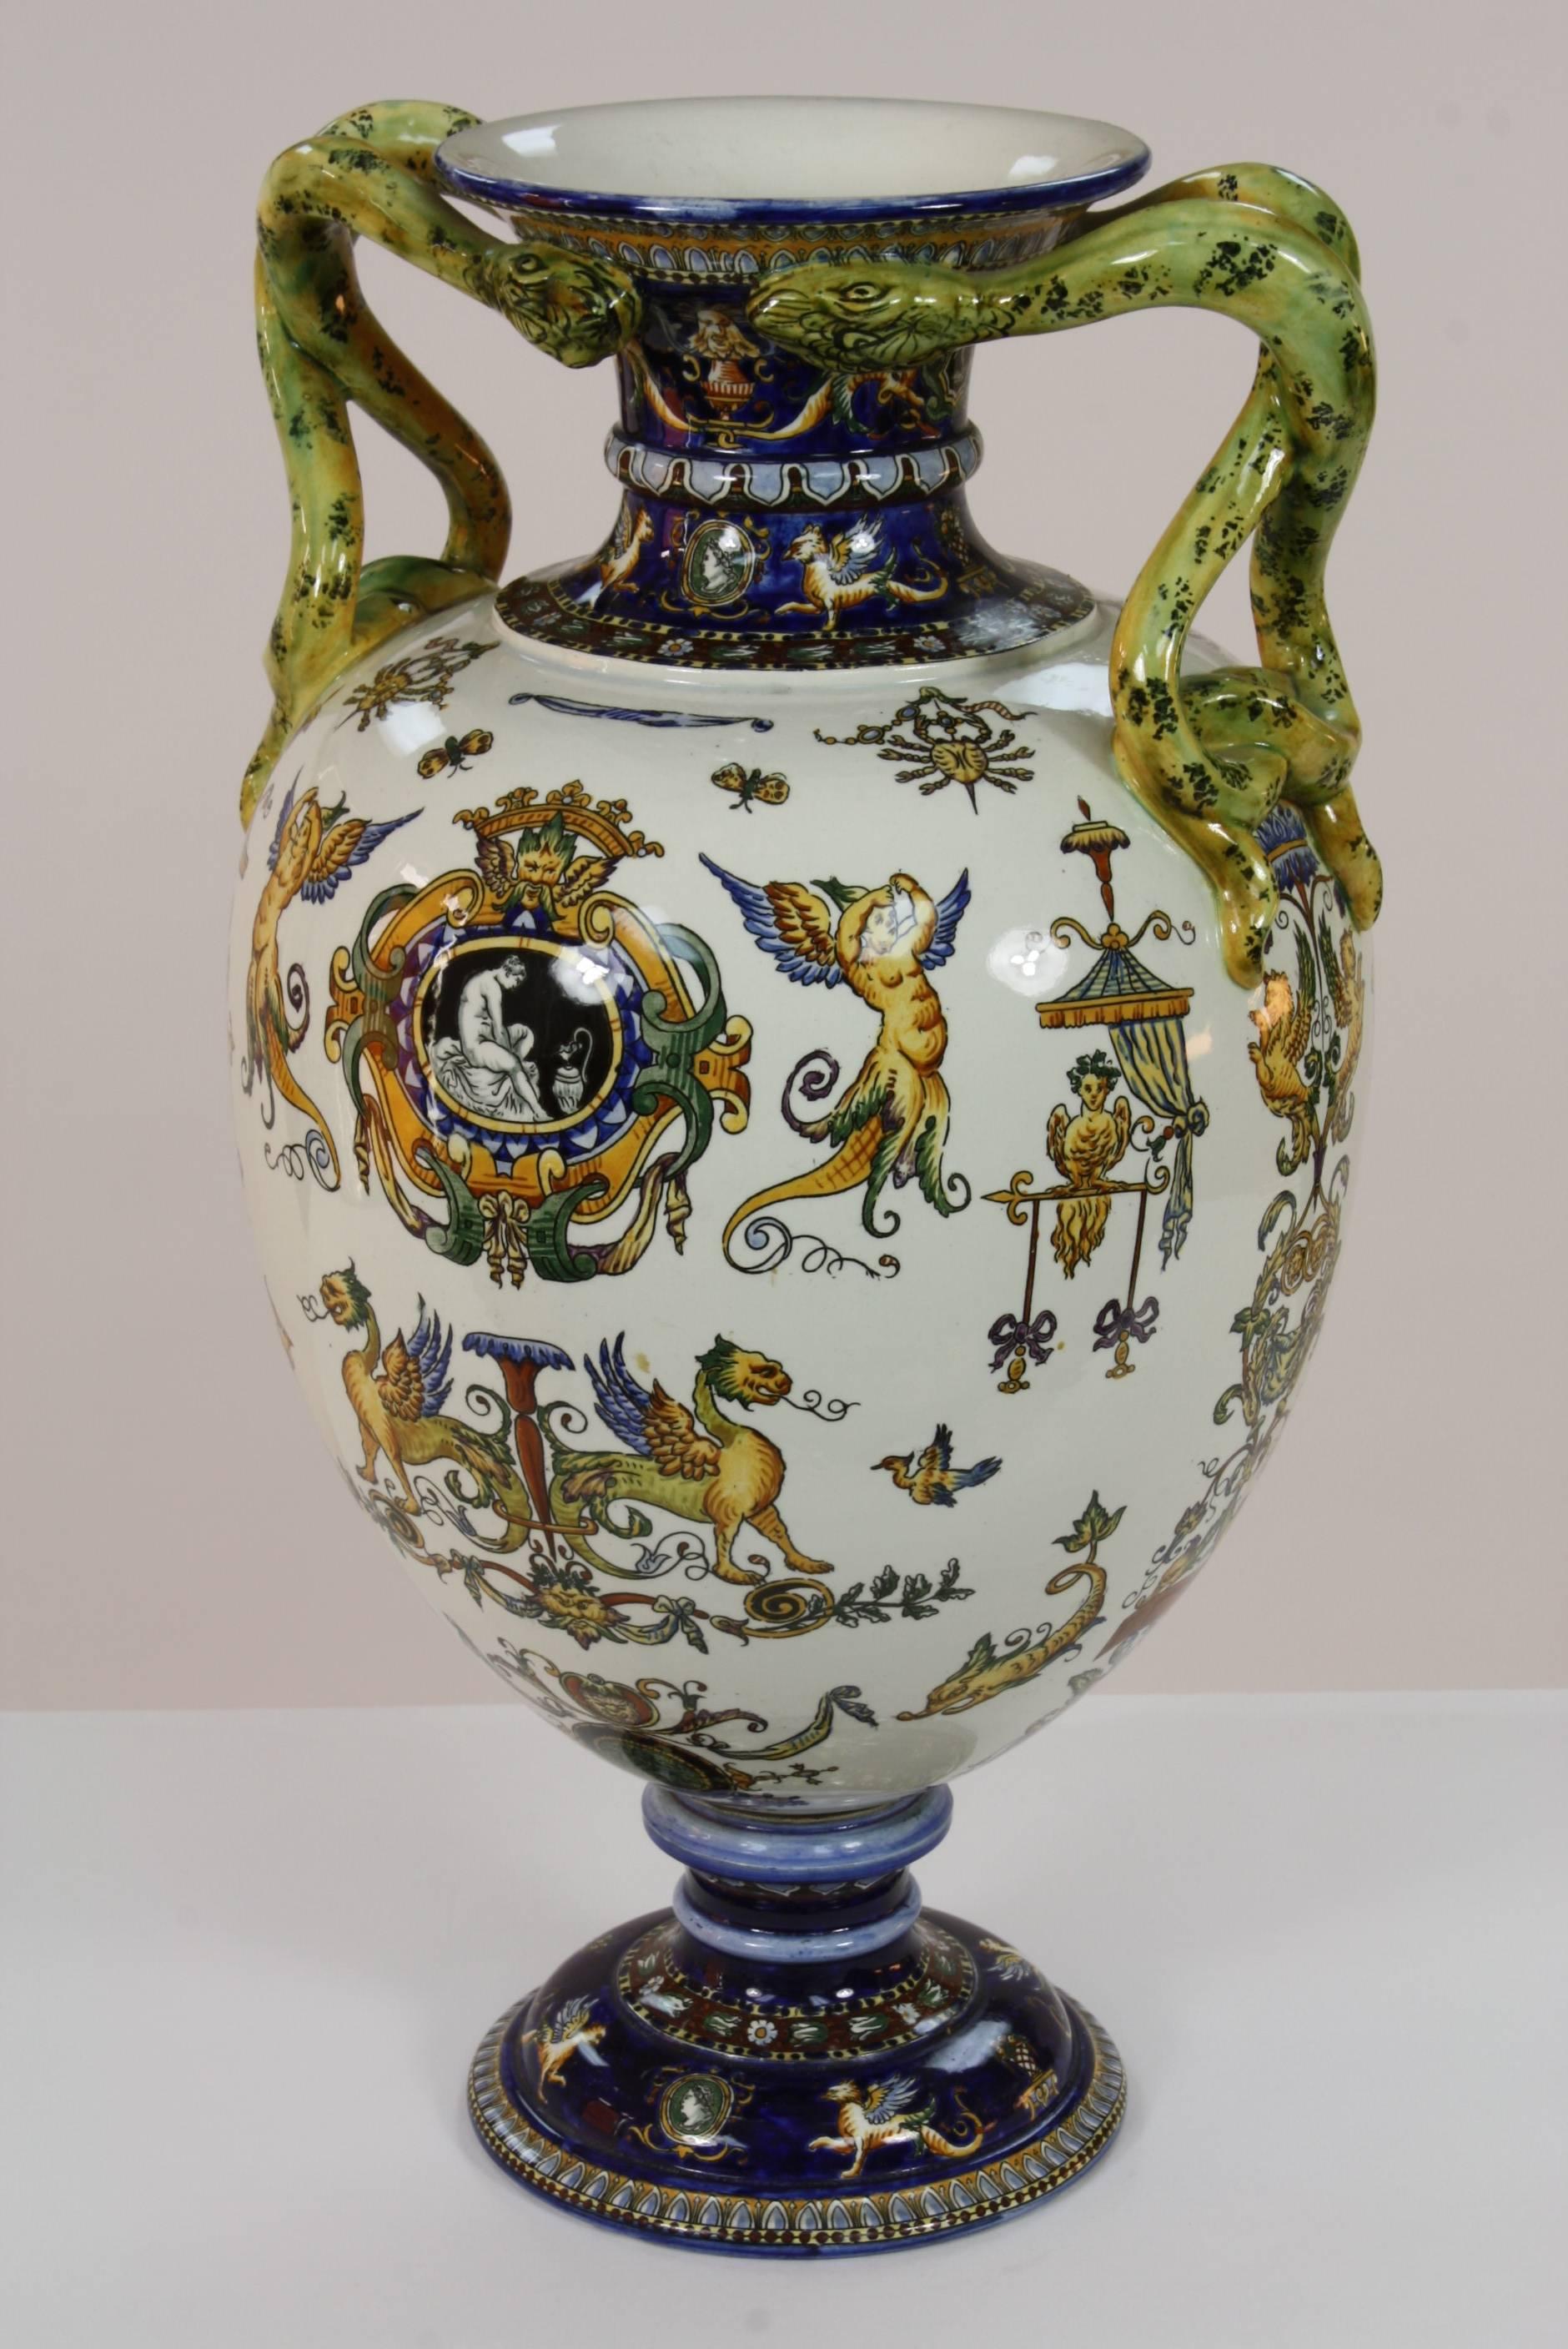 An highly-detailed and impressive French faience two-handled vase by Gien, in the 